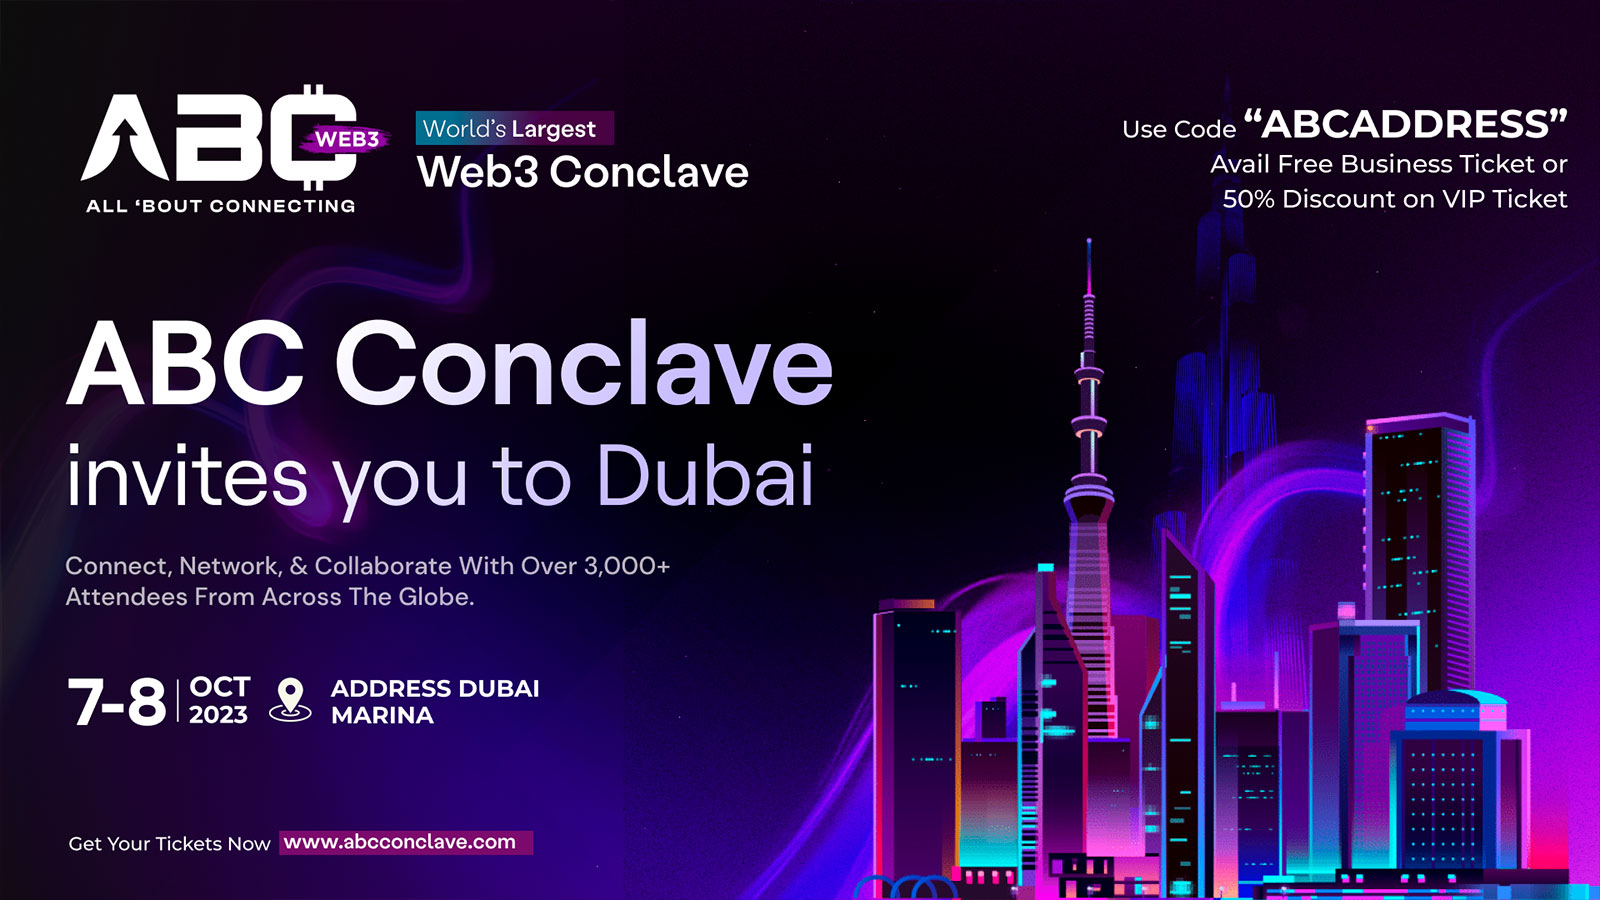 Dubai to Witness the World’s Largest Web3 Conference: ABC Conclave to Unite Global Web3 Pioneers at Address Dubai Marina